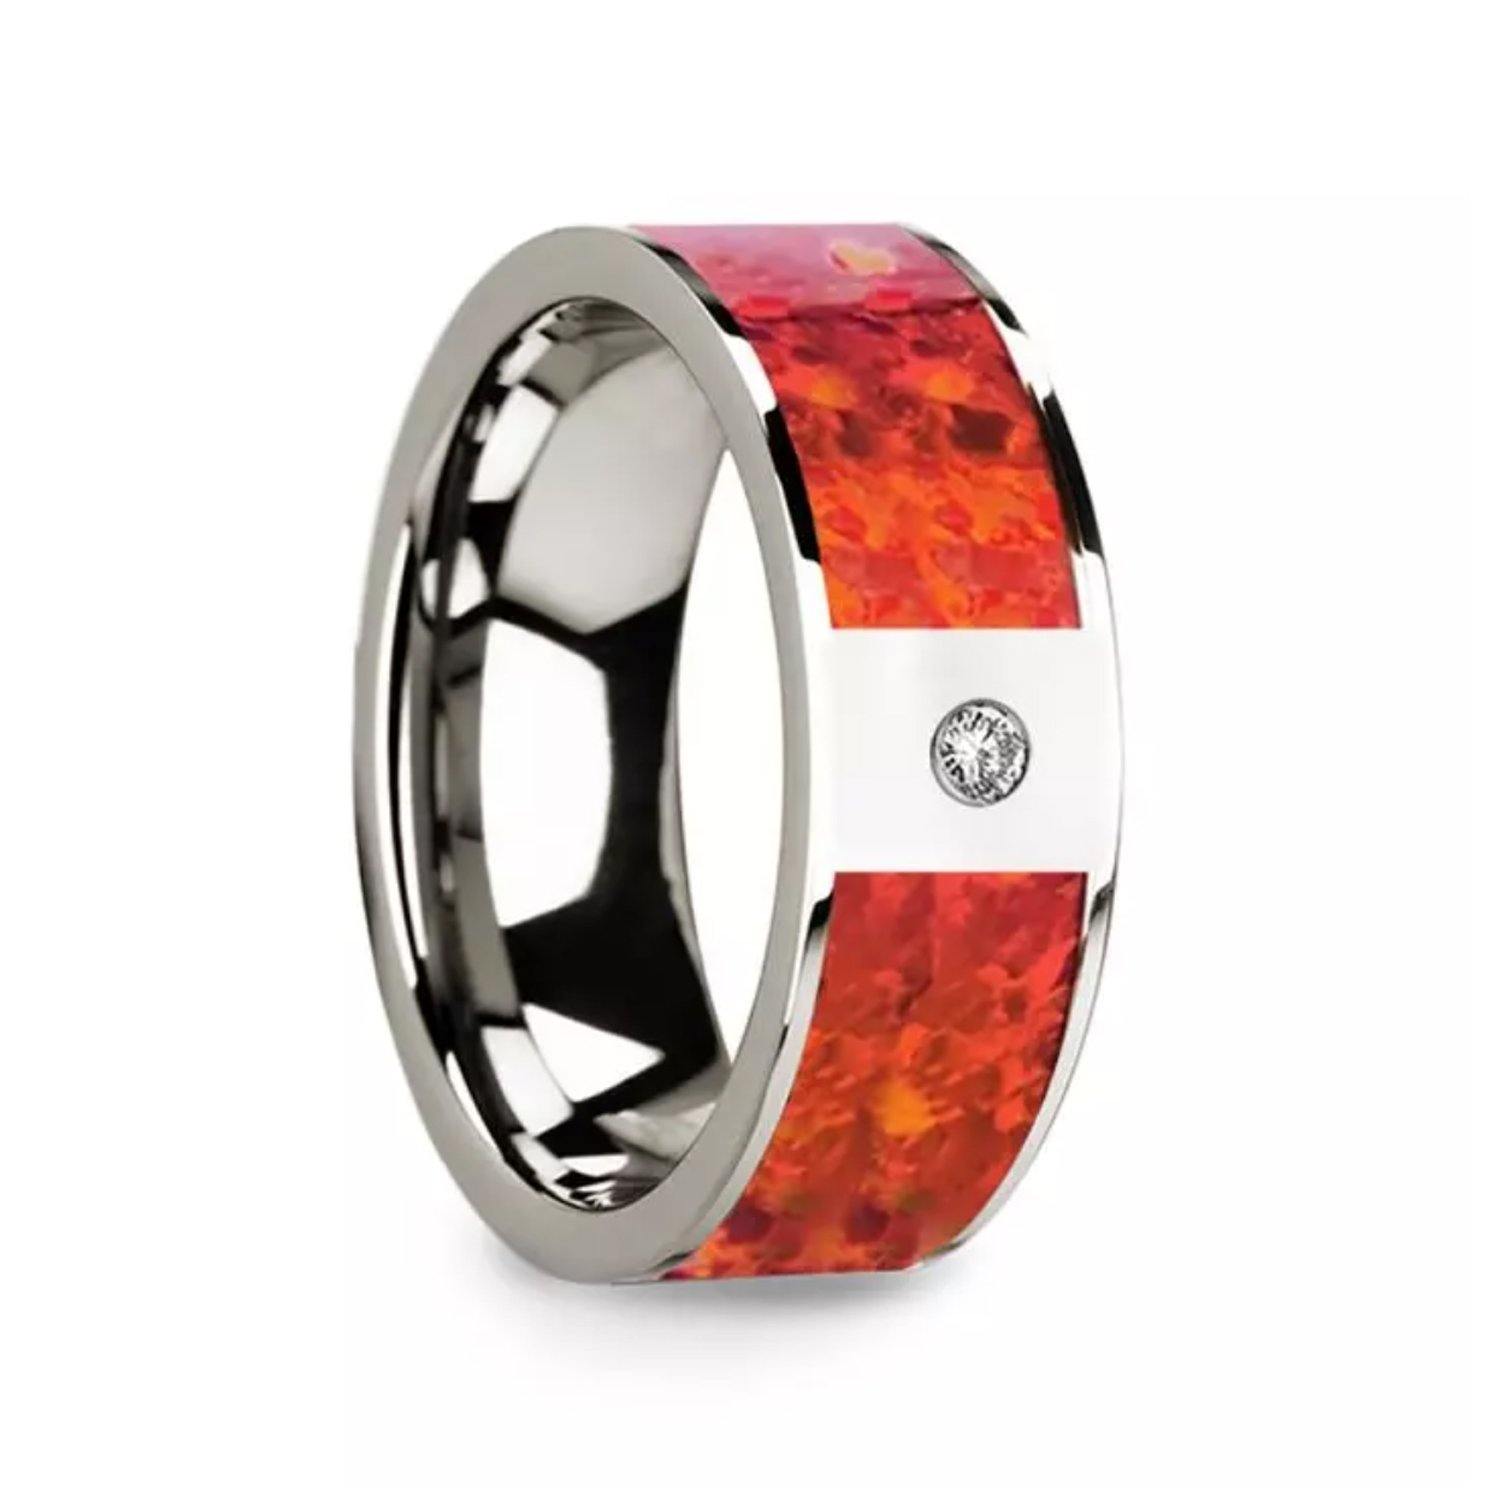 MAGNETO - Red Opal Inlaid Polished 14k White Gold Men’s Wedding Ring with Diamond Accent - 8mm - The Rutile Ltd